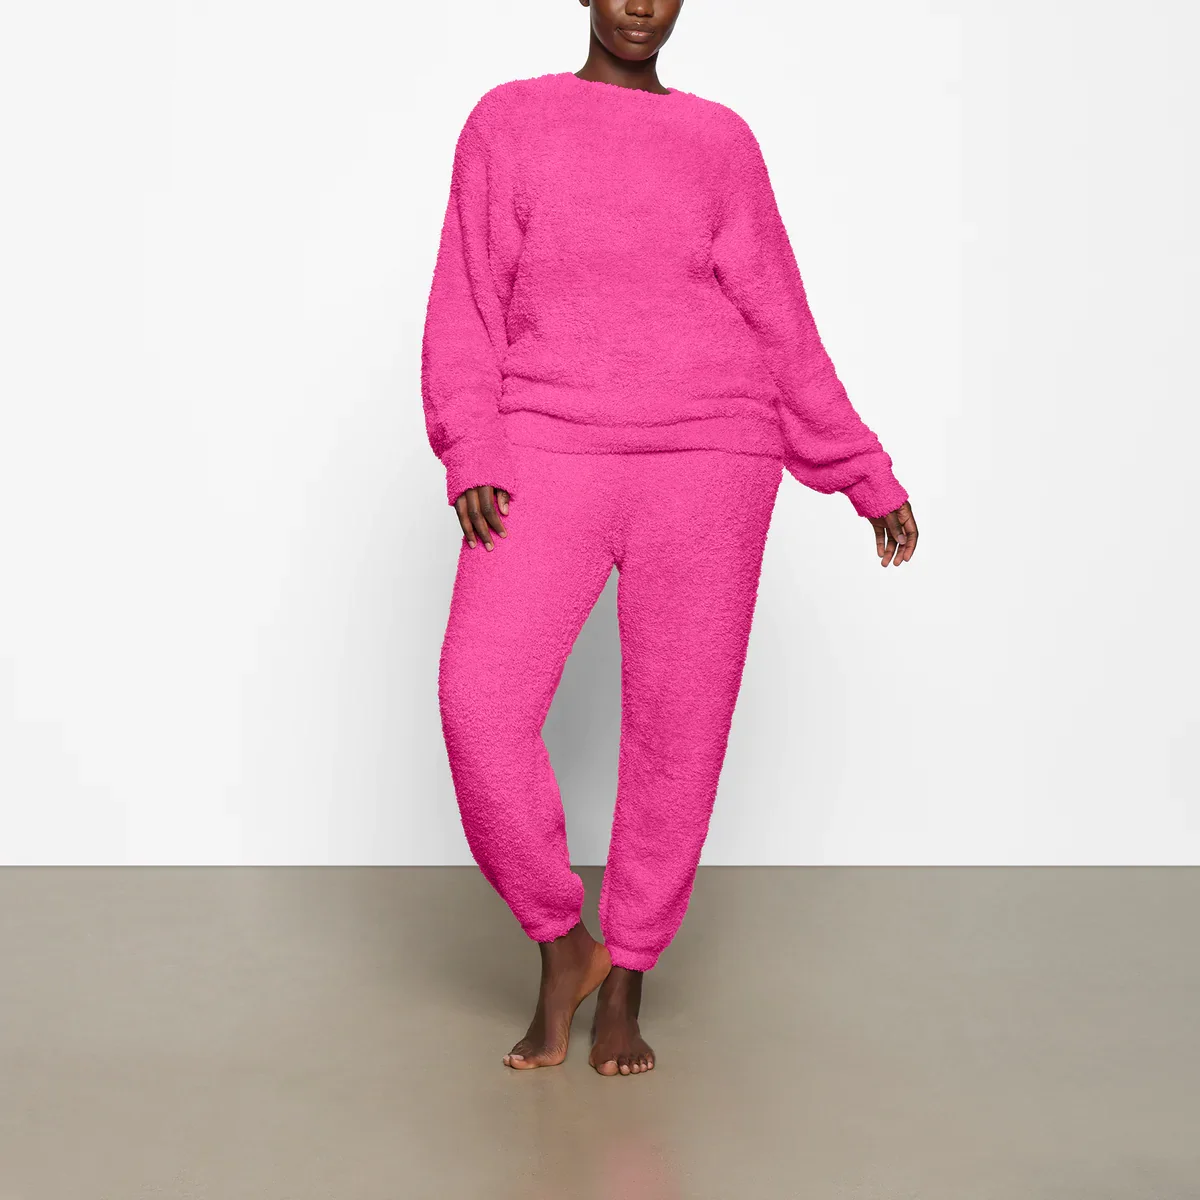 Exclusive Holiday Loungewear : SKIMS Holiday Gift Shop